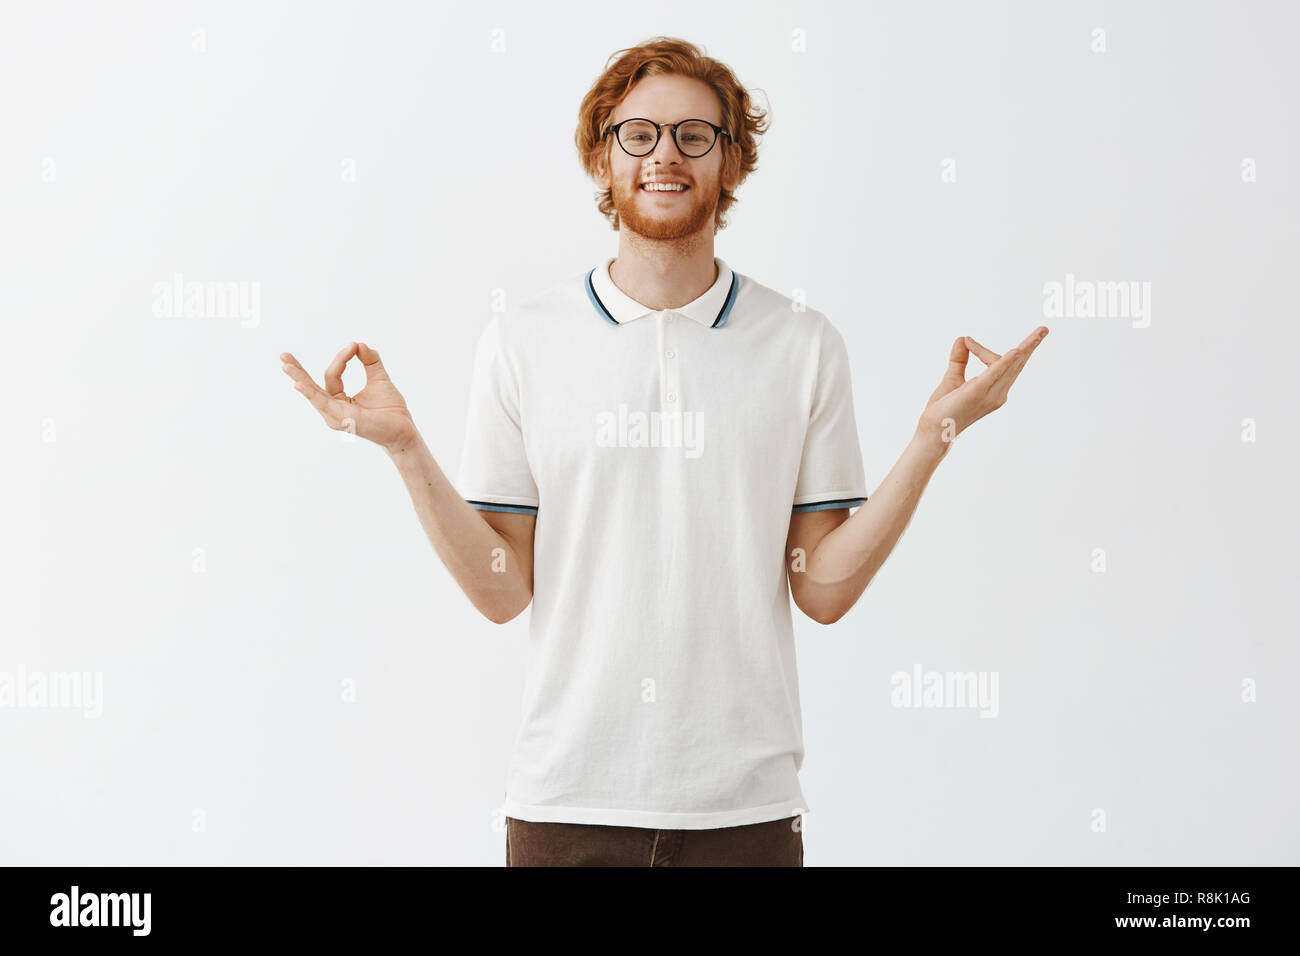 Man is good expample of patience and relaxation. Happy calm good-looking redhead guy with beard in glasses and white casual shirt spreading hands aside in zen gesture meditating and smiling relieved Stock Photo